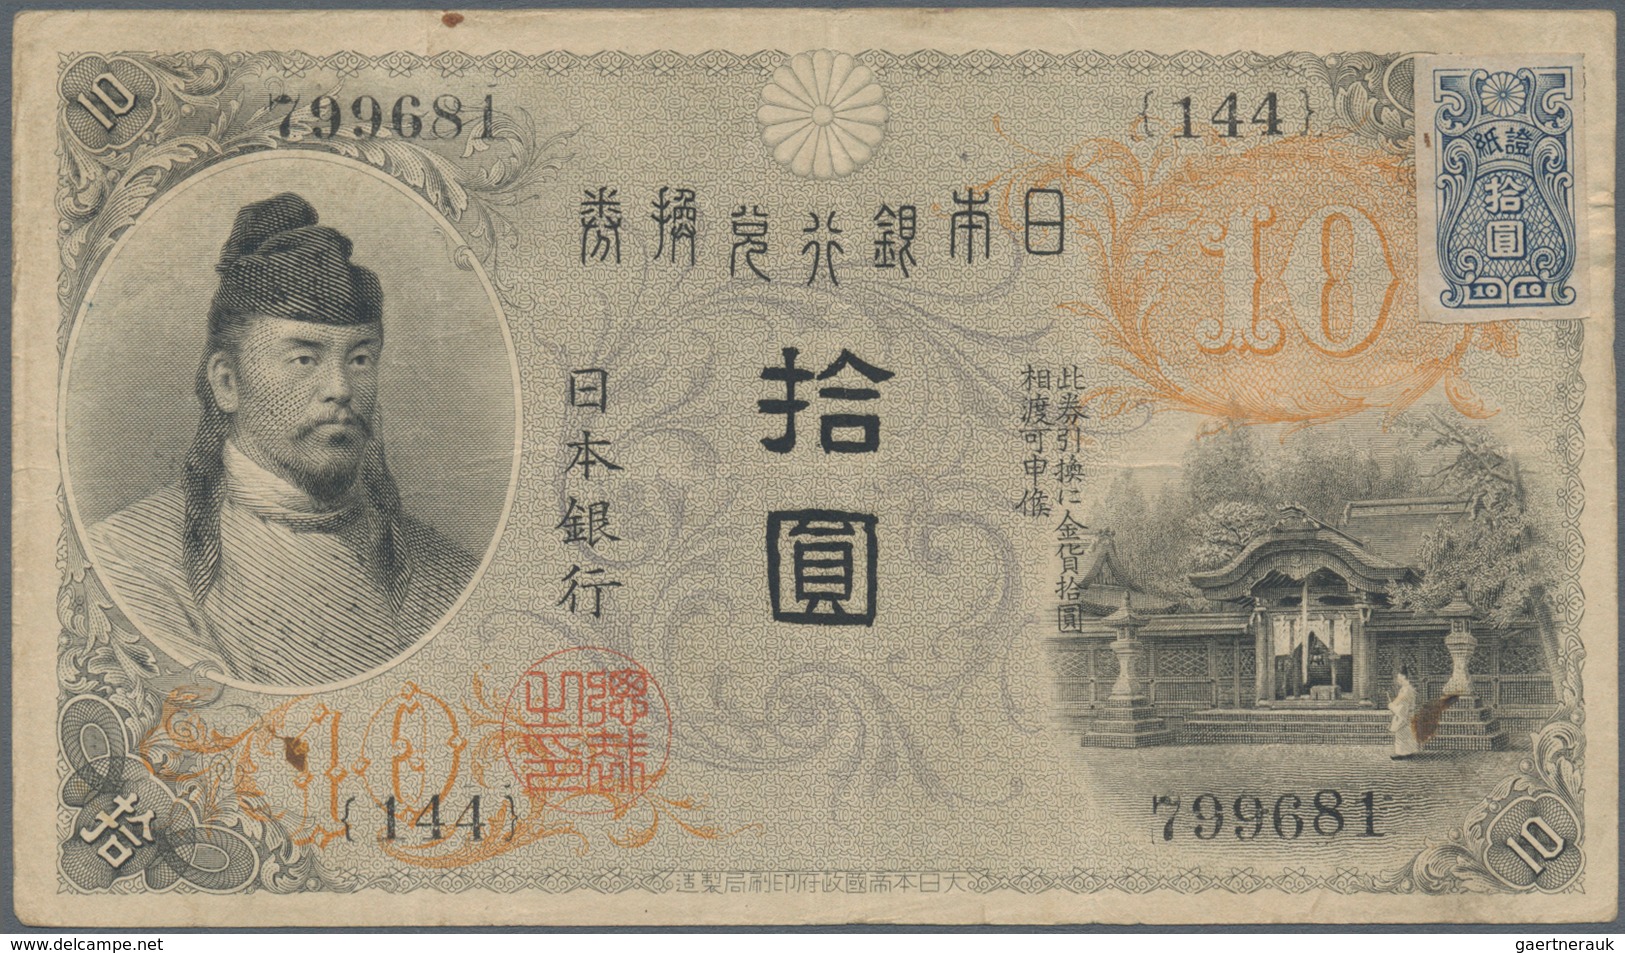 01894 Japan: 10 Yen ND P. 79, Used With Folds And Creases, Strong Paper, Original Colors, Condition: F. - Giappone